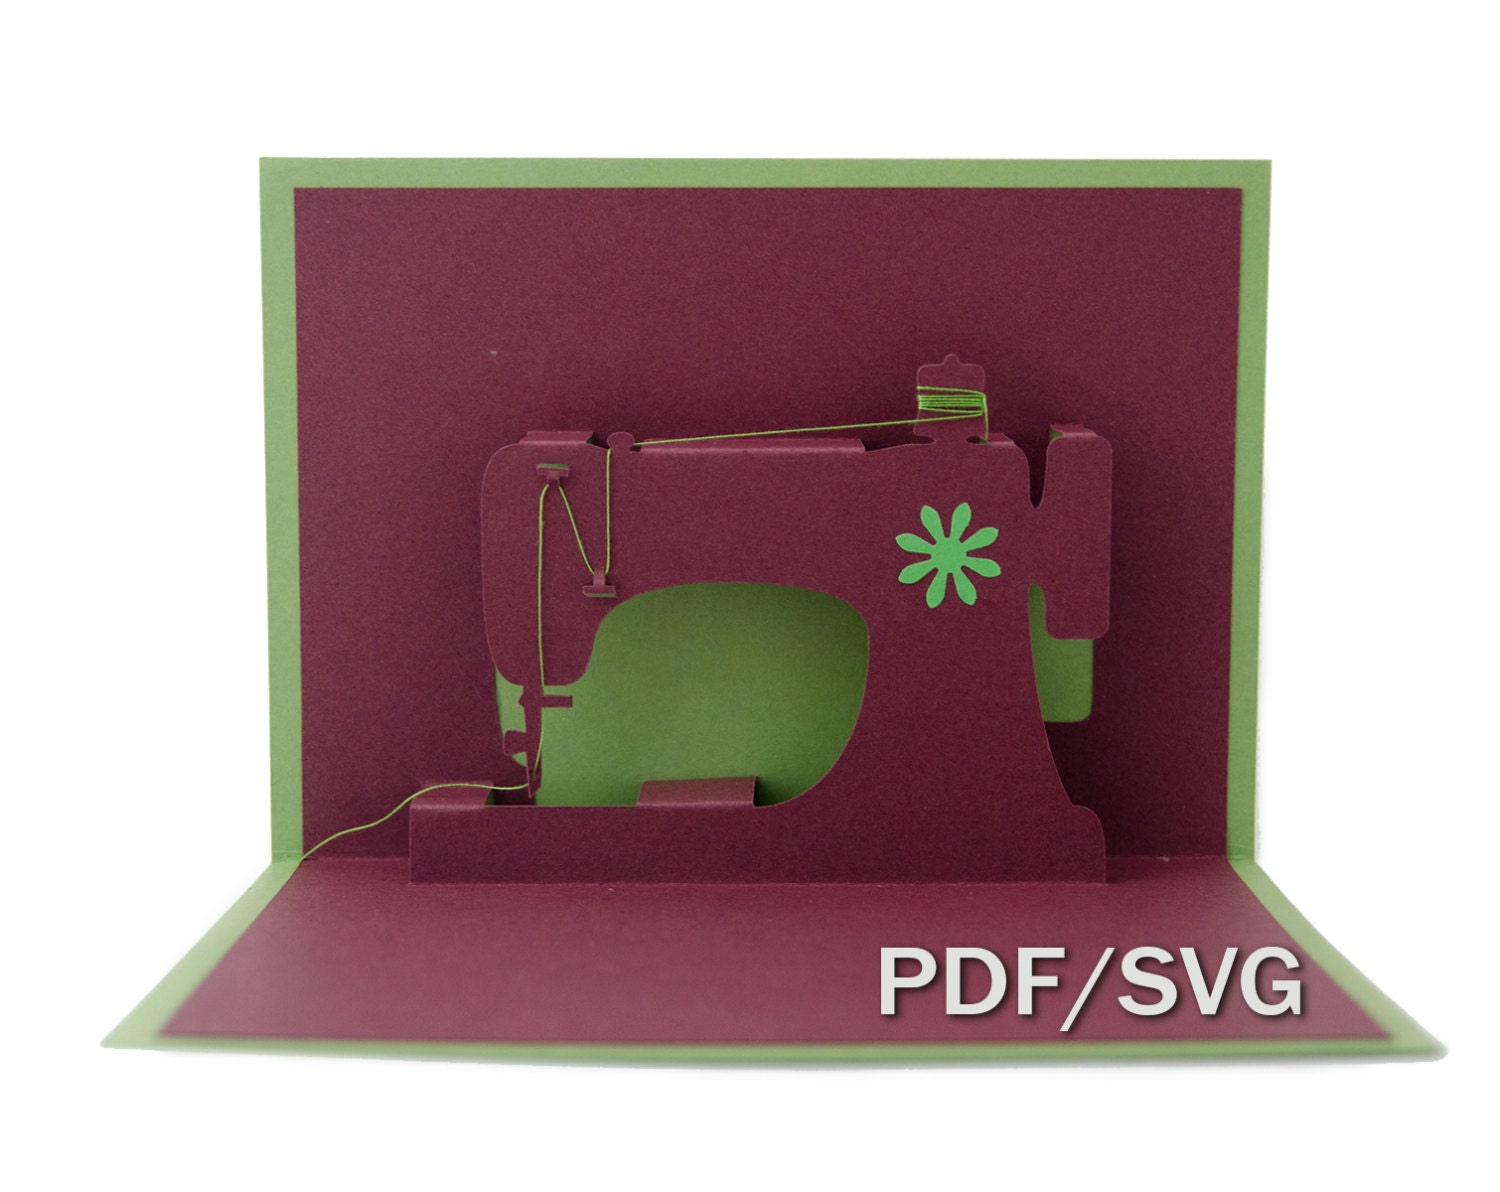 Download Templates PDF & SVG for Sewing machine 3D pop up card